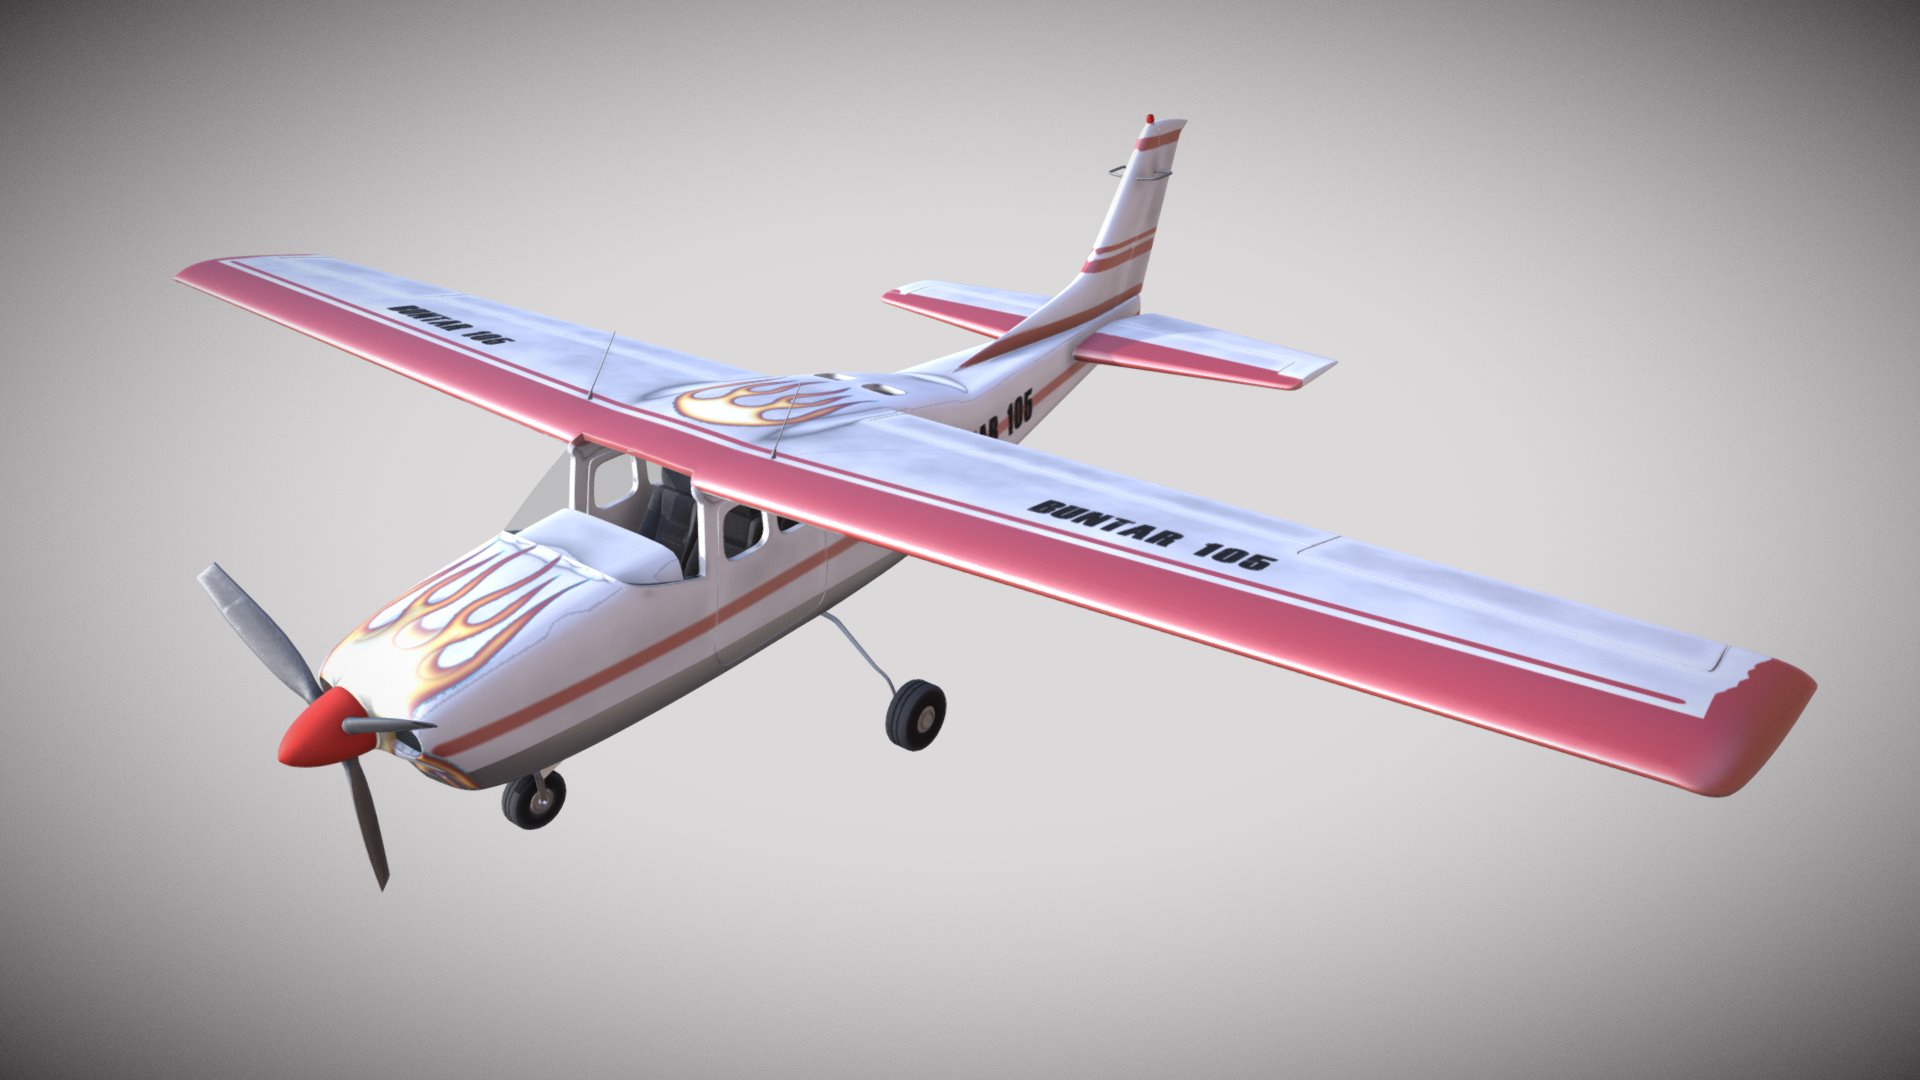 3D model Plane – One Material - This is a 3D model of the Plane - One Material. The 3D model is about a small airplane flying.